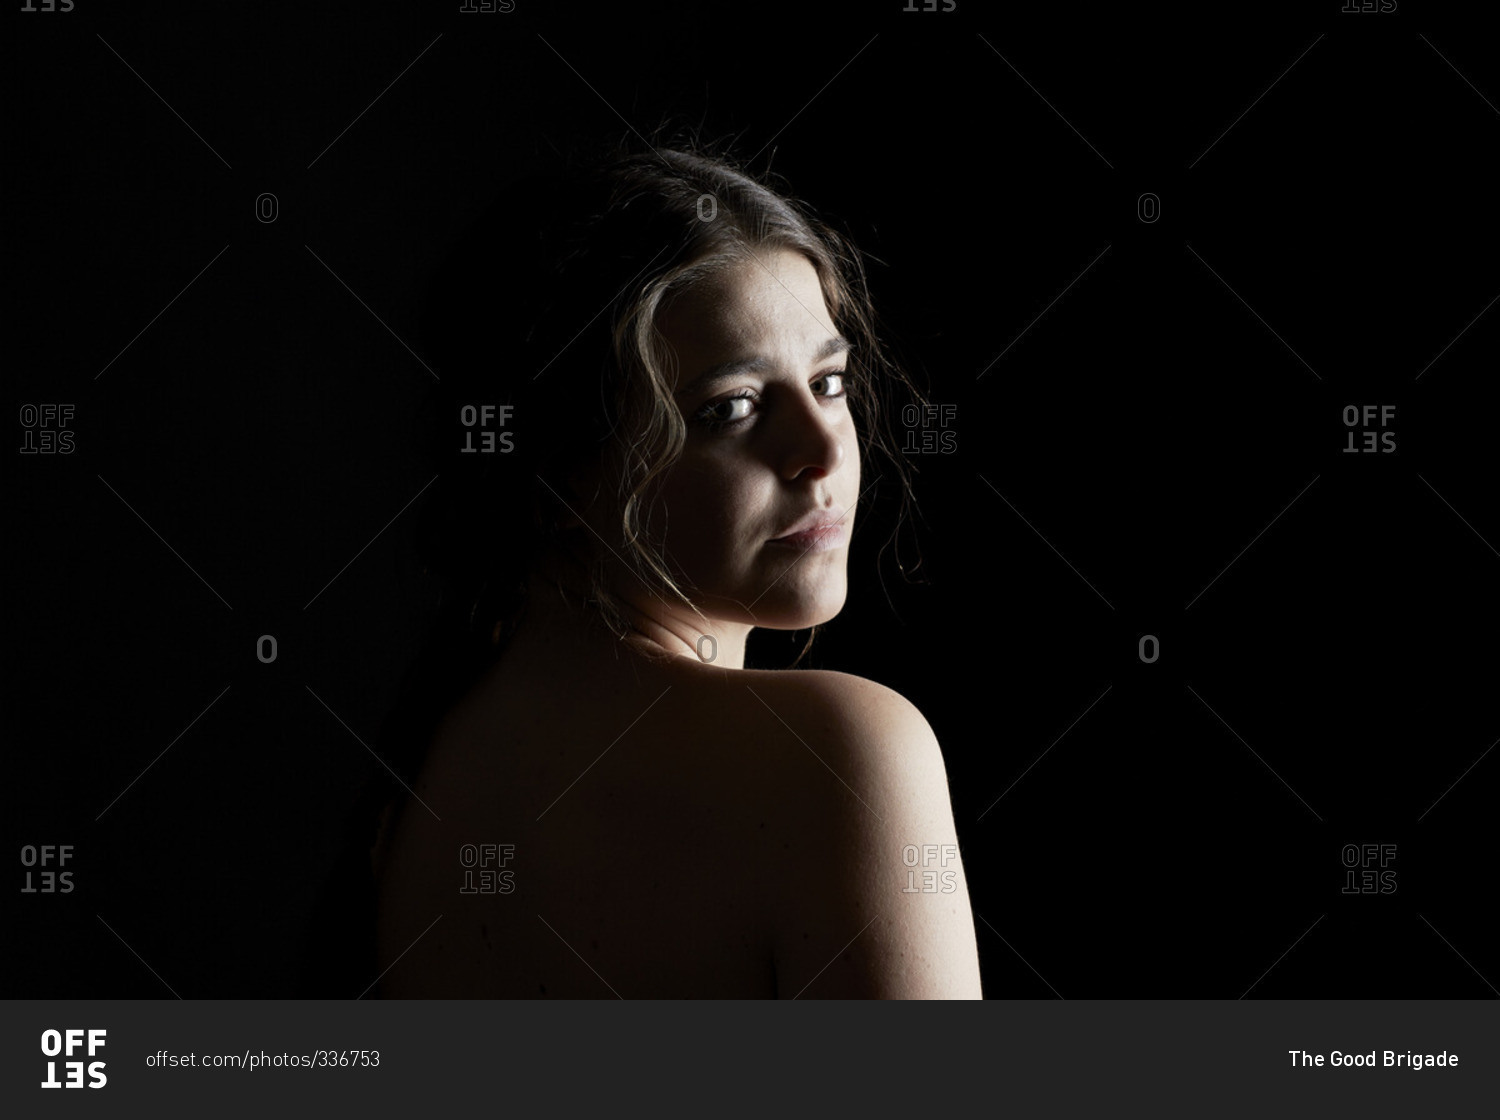 shirtless young woman looking back over her shoulder stock photo offset shirtless young woman looking back over